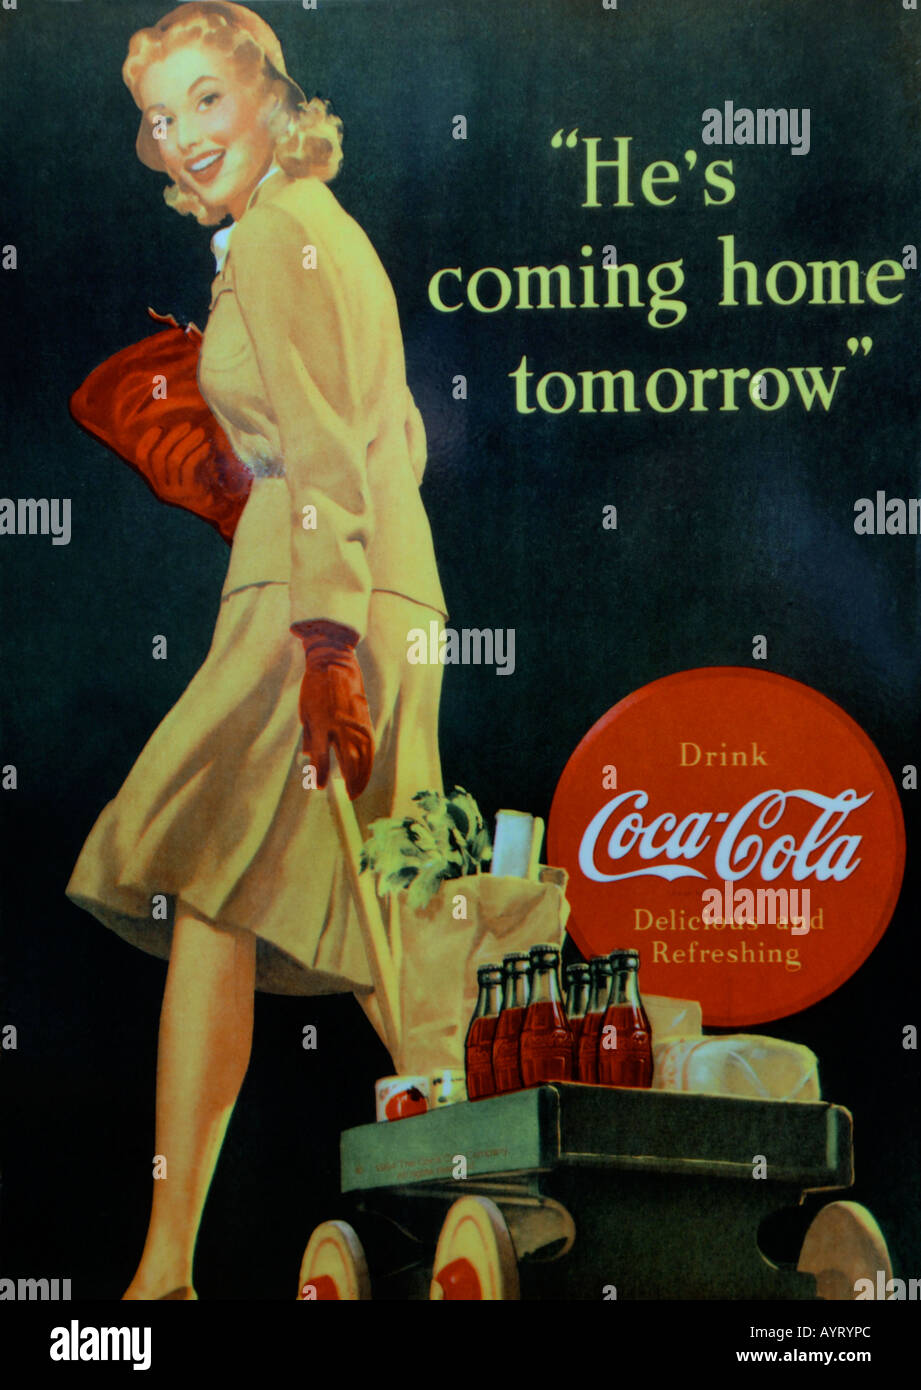 Old fashioned coca cola advert poster Stock Photo